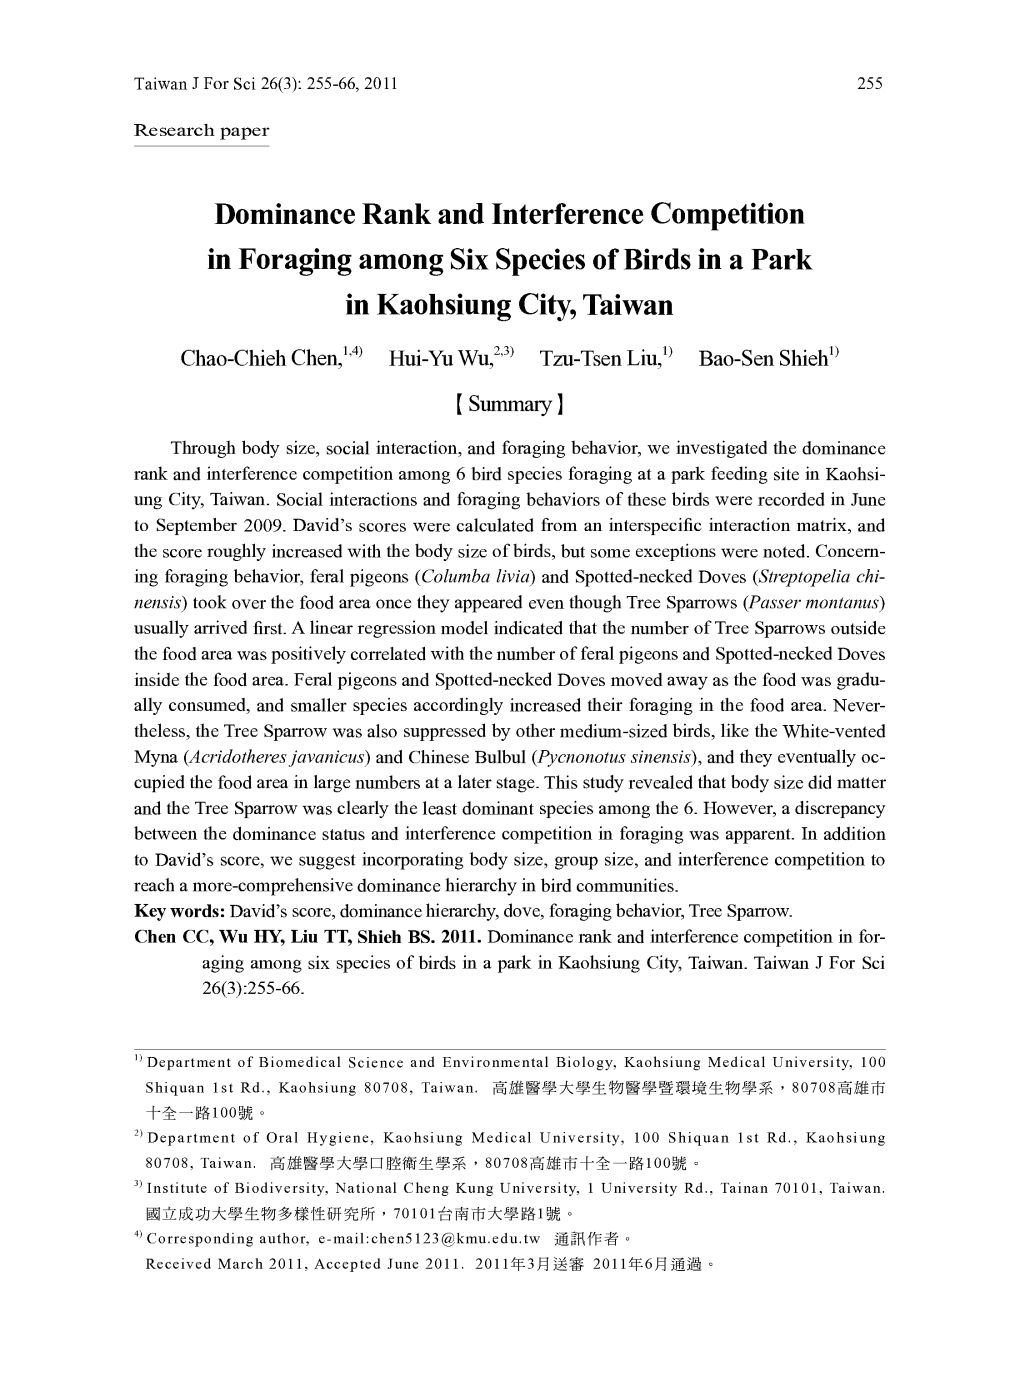 Dominance Rank and Interference Competition in Foraging Among Six Species of Birds in a Park in Kaohsiung City, Taiwan